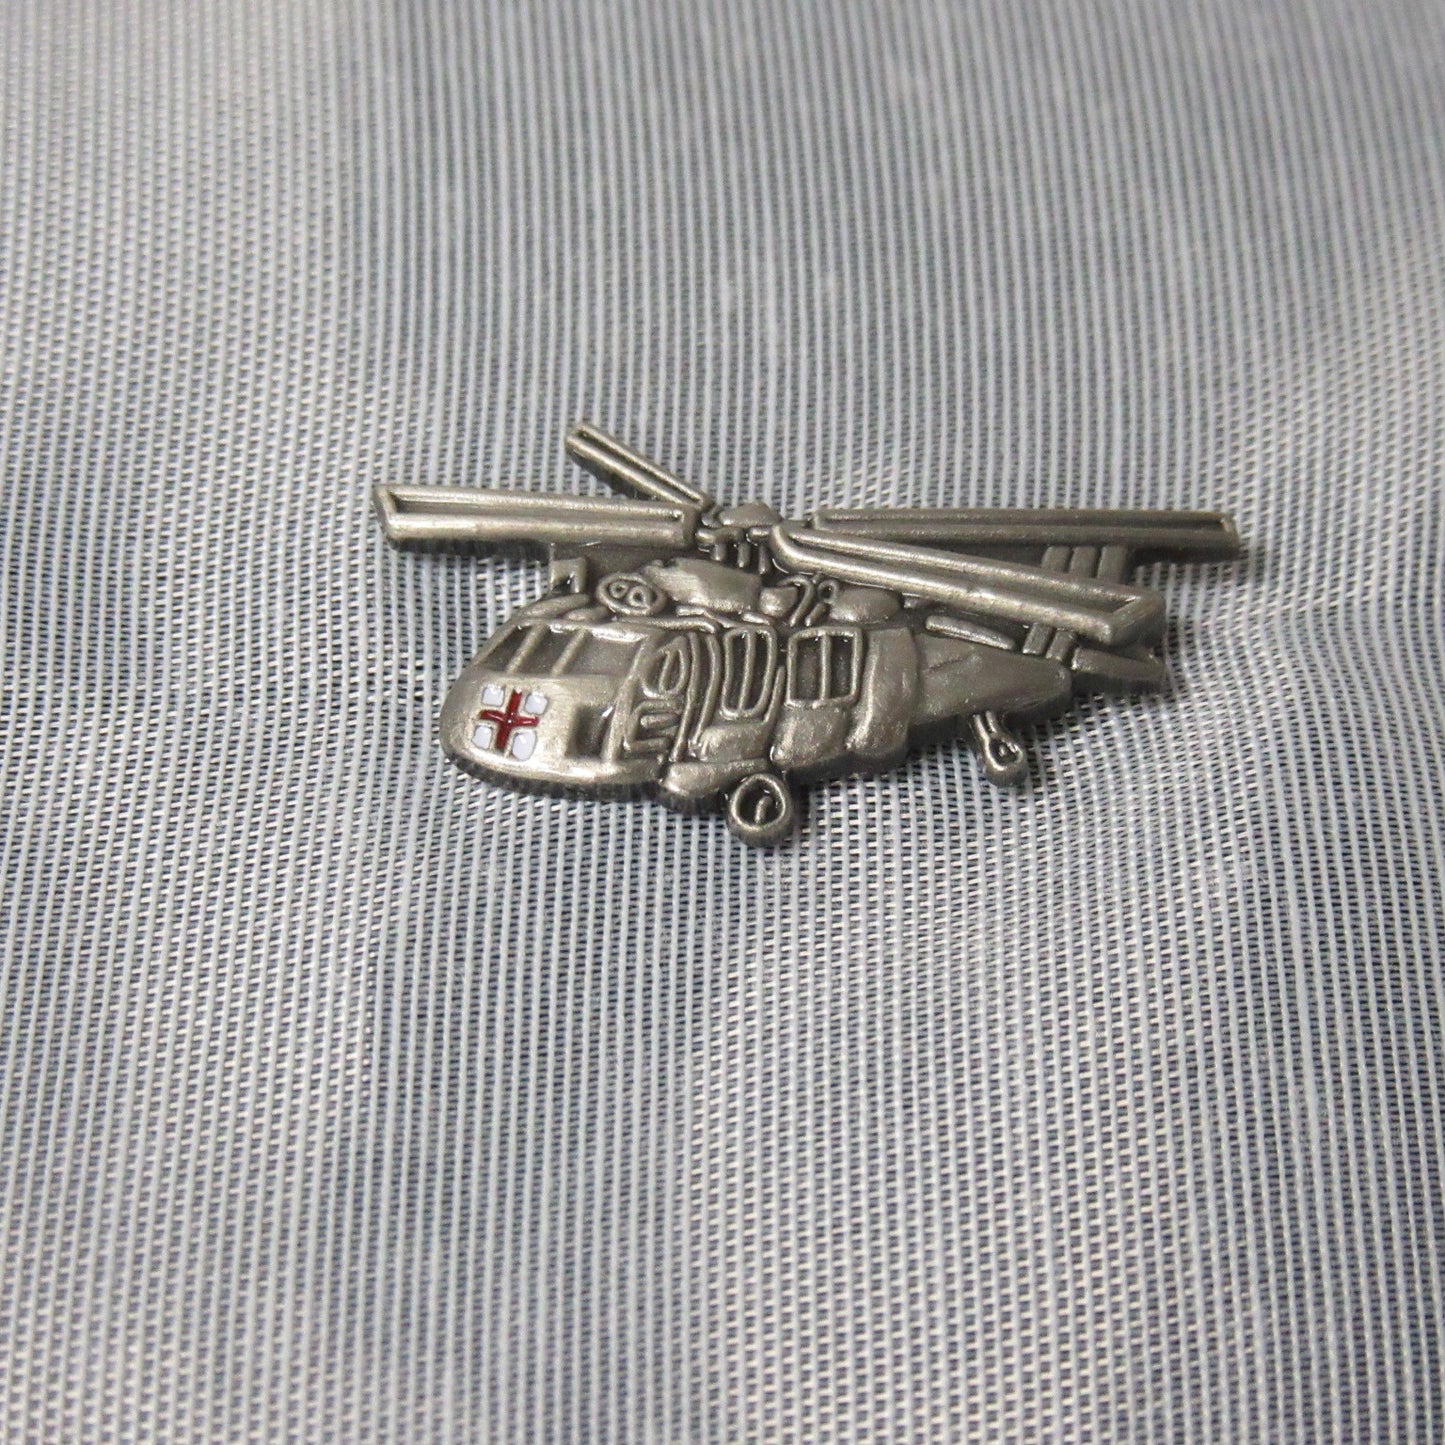 OH-58 Kiowa Helicopter Lapel Pin – Aviation Museum Gift Shop